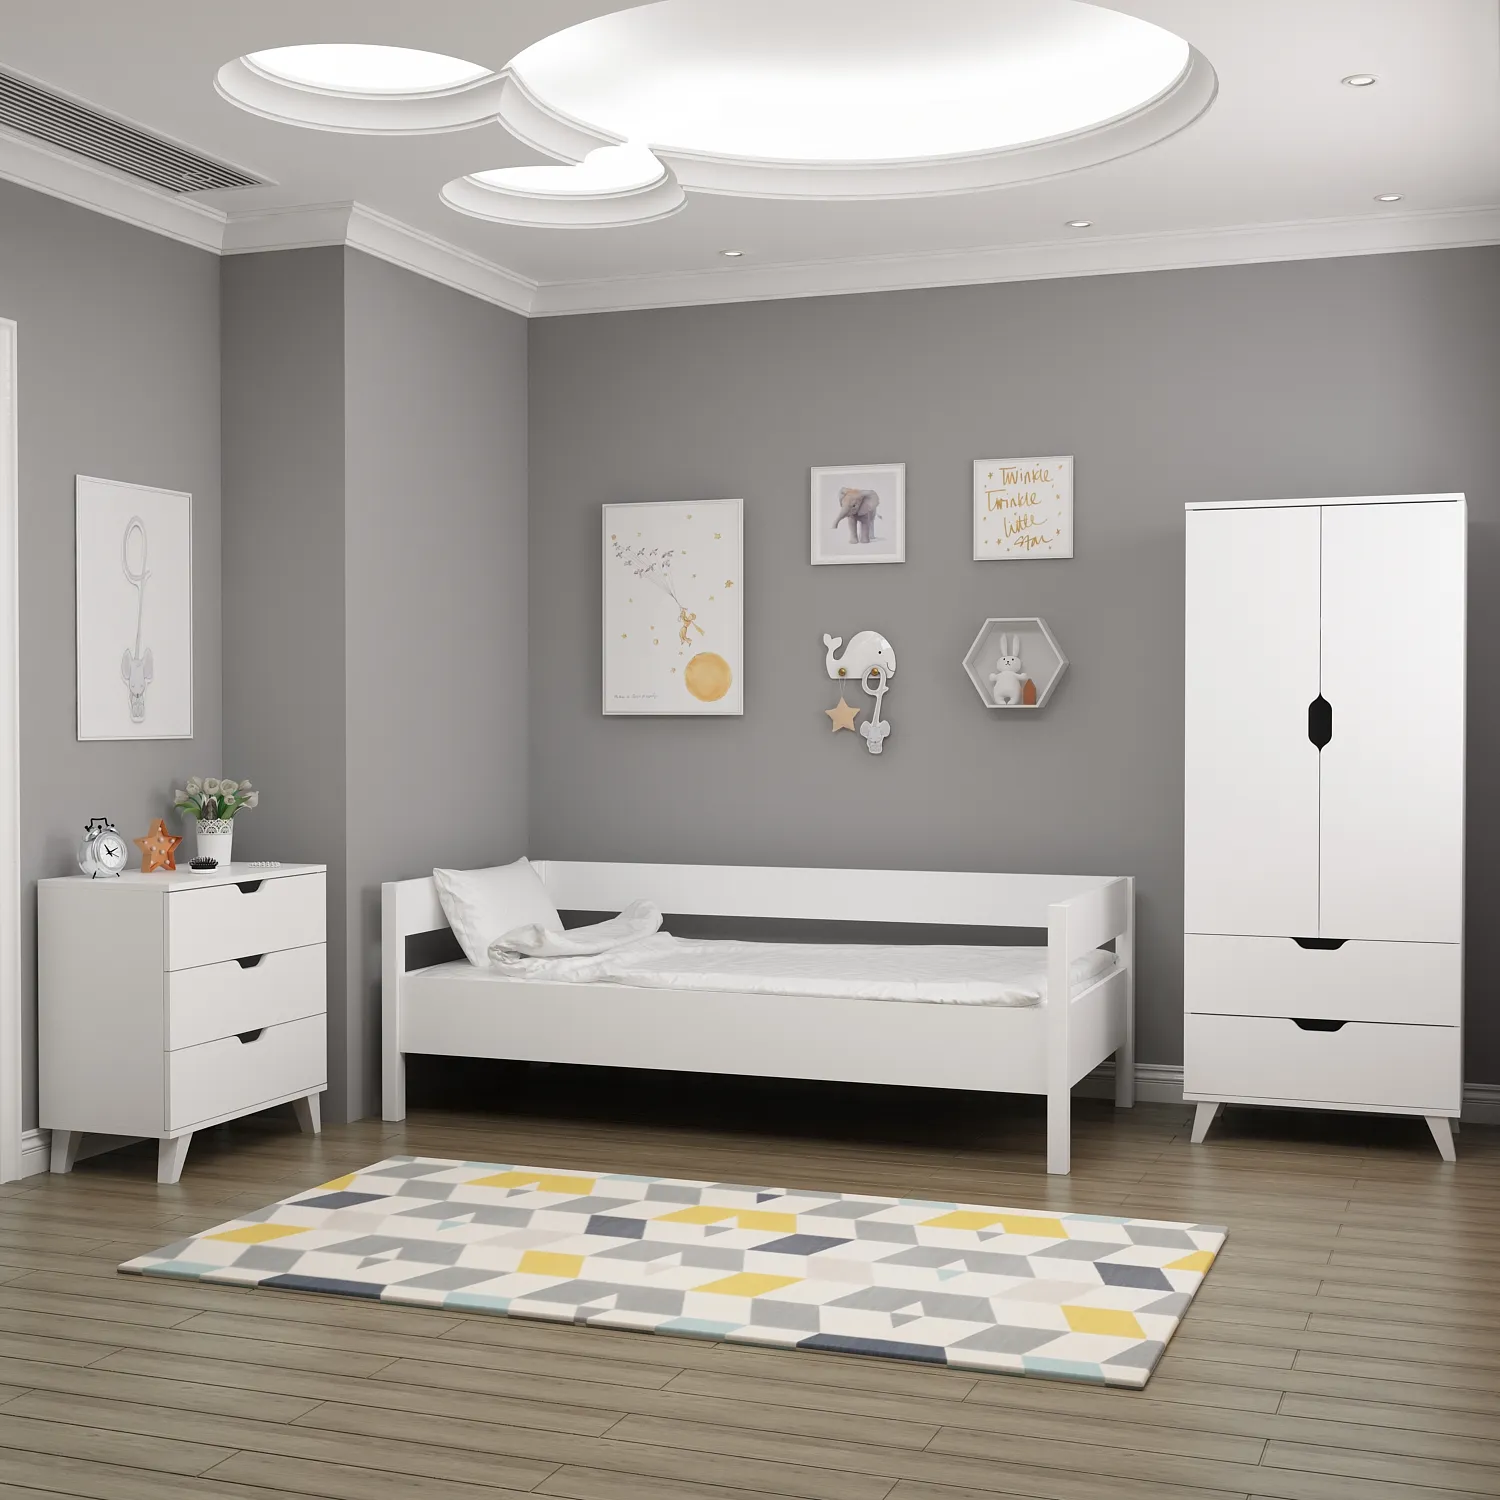 Ergonomic VALENCIA Set White A Three-drawer Chest of Drawers Cabinet With Doors Wardrobe Luxury Style Kids Room Home Furniture